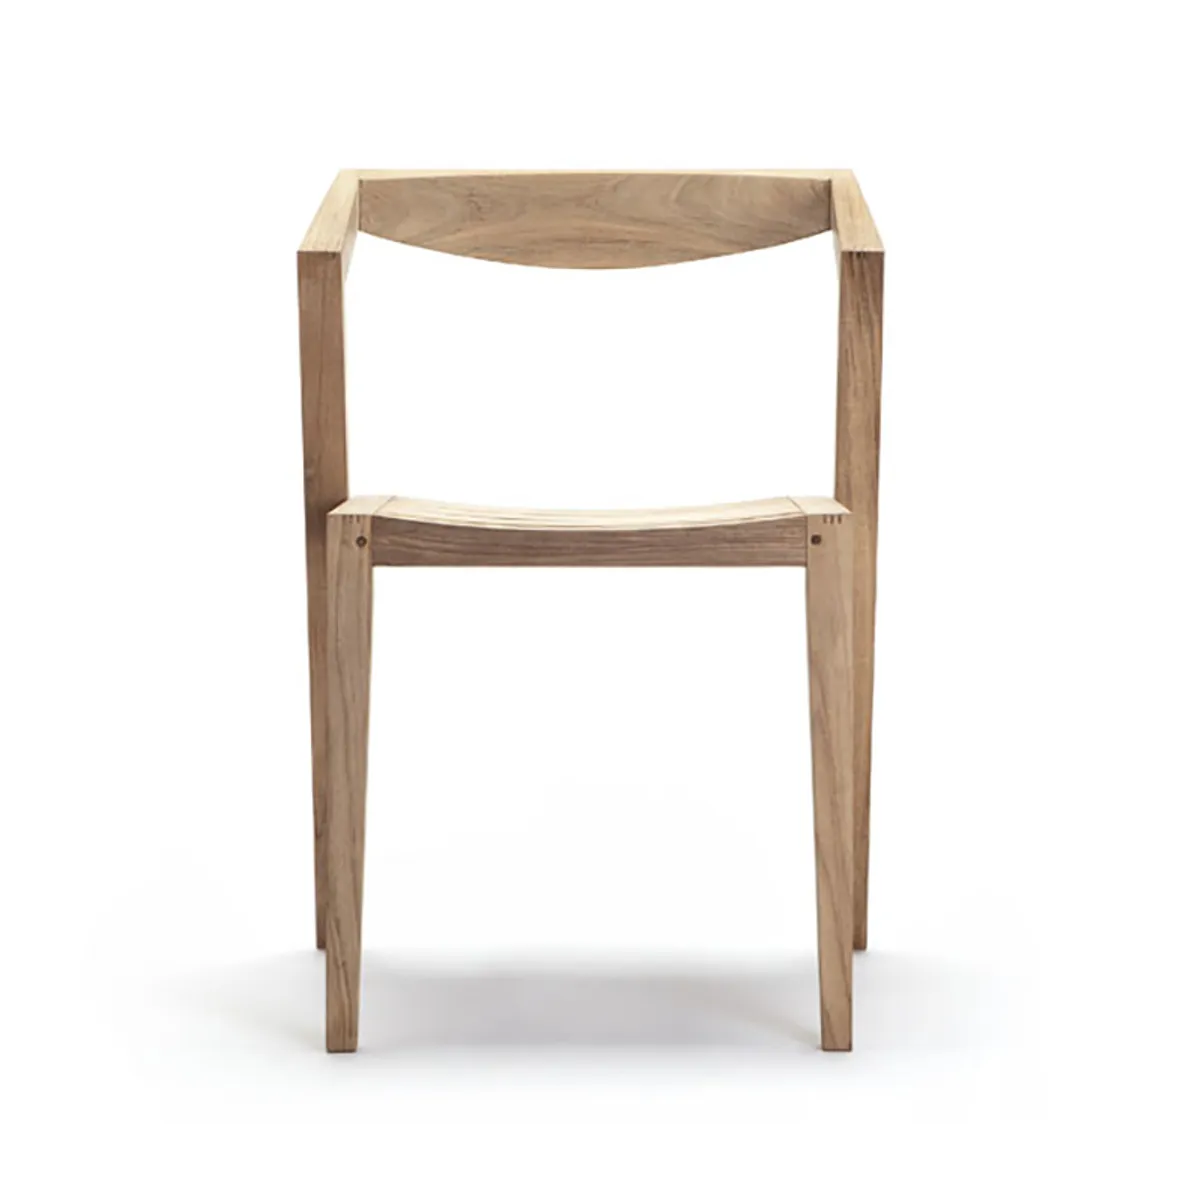 Borough Side Chair Stacking Outdoor Furniture In Teak Wood 074